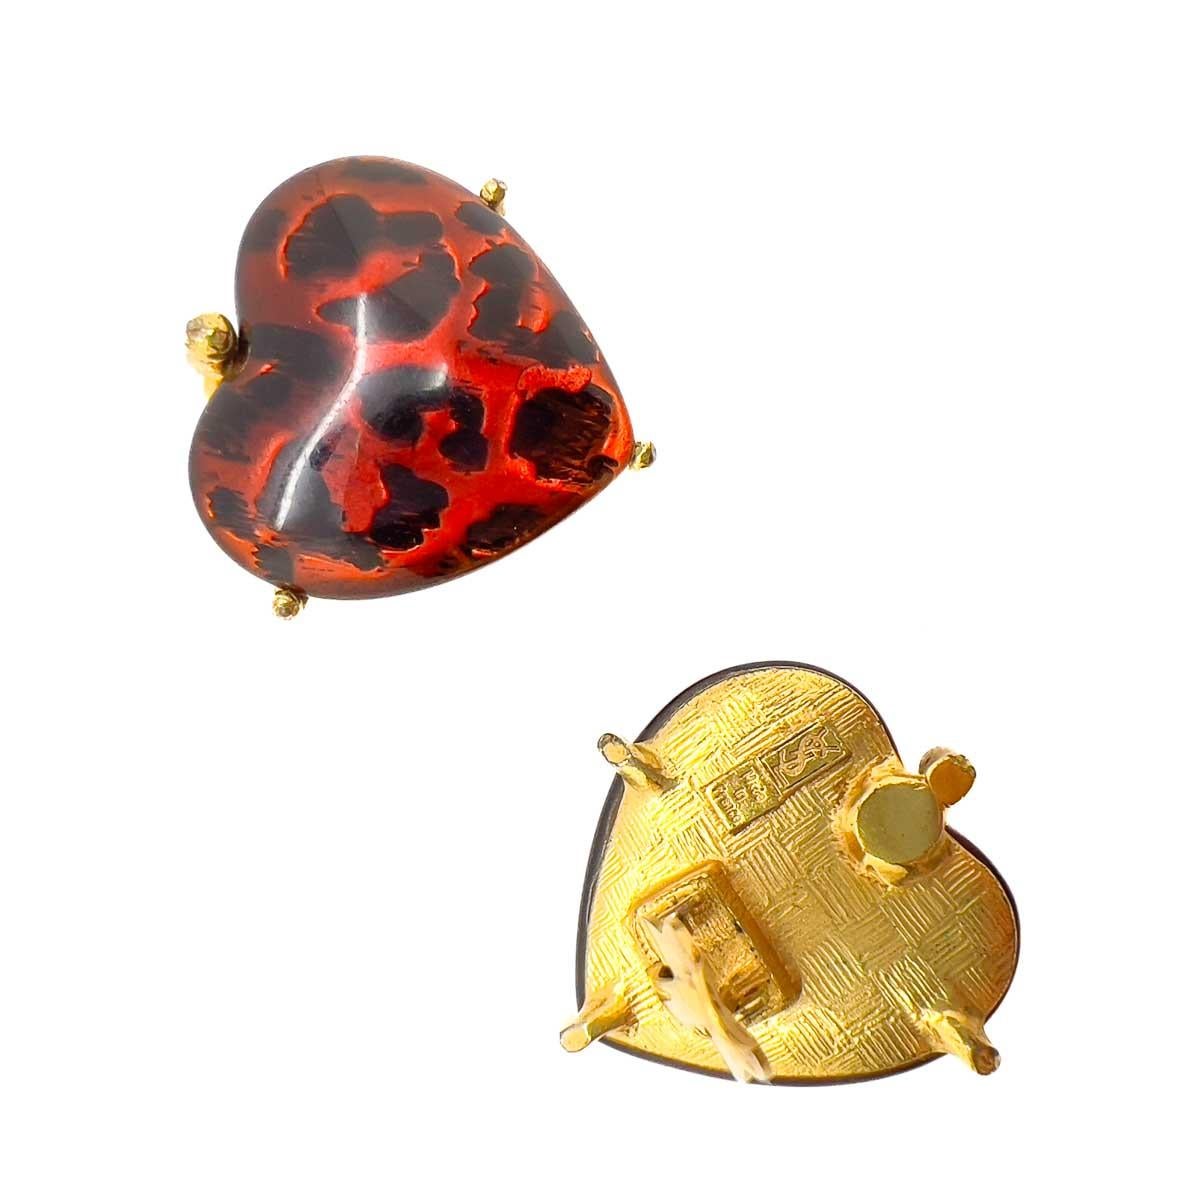 A pair of Vintage YSL Heart Leopard Earrings. An ultra cool combination of the YSL heart motif with an animal print finish. Utterly chic and timeless additions to your style repertoire.
In 1961, following his time as Dior's Art Director, Yves Saint